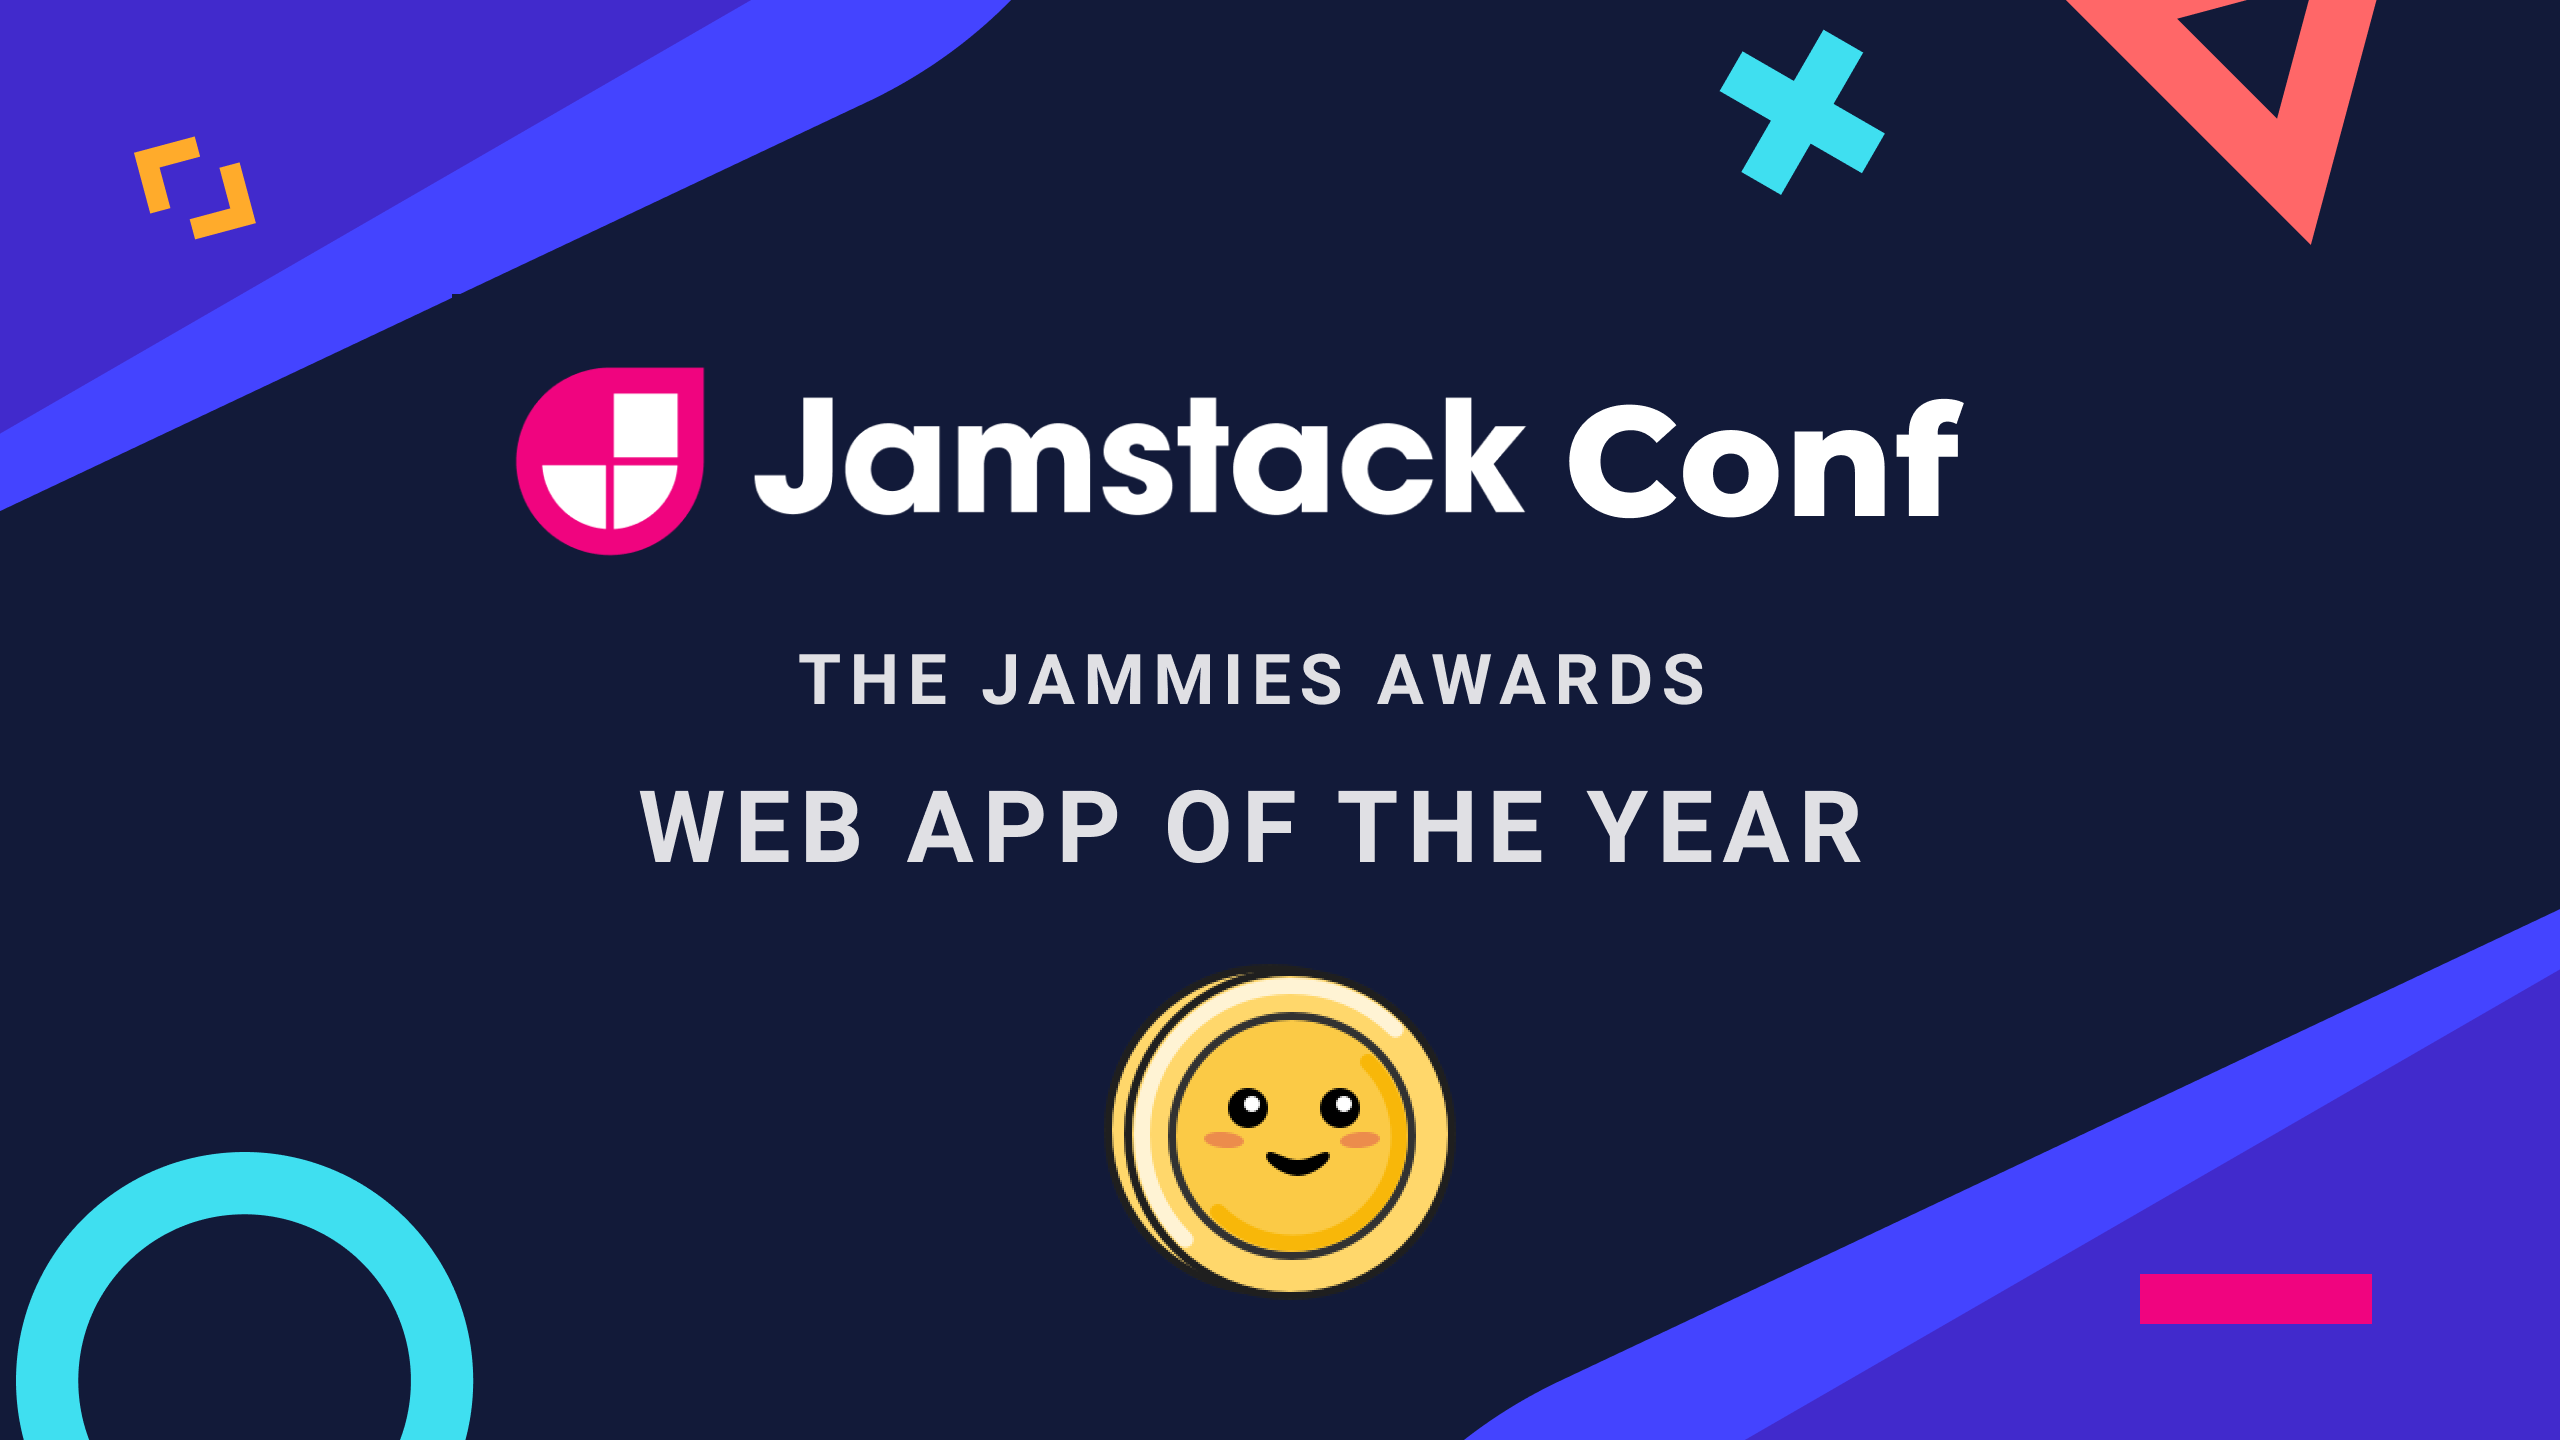 Jamstack Conf web app of the year 2020